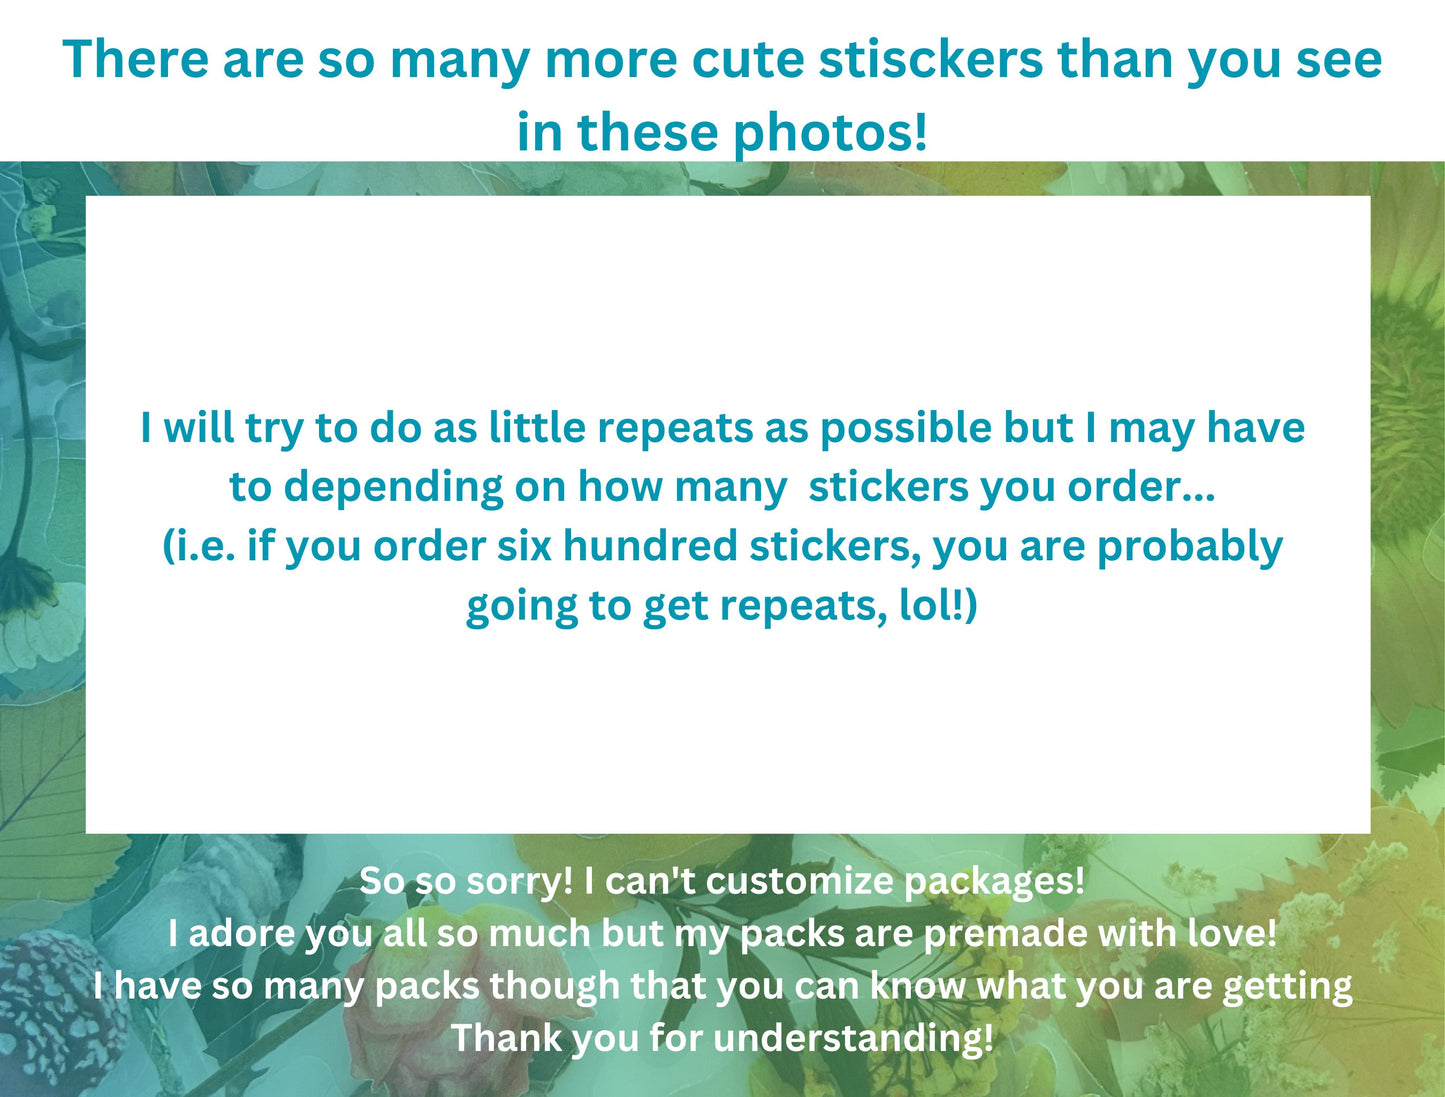 Random Sticker Grab Bag, Mystery Sticker Grab Bag, Plants and Vintage Buttons, Cute Stickers, Journal Stickers, Clear and Paper Stickers